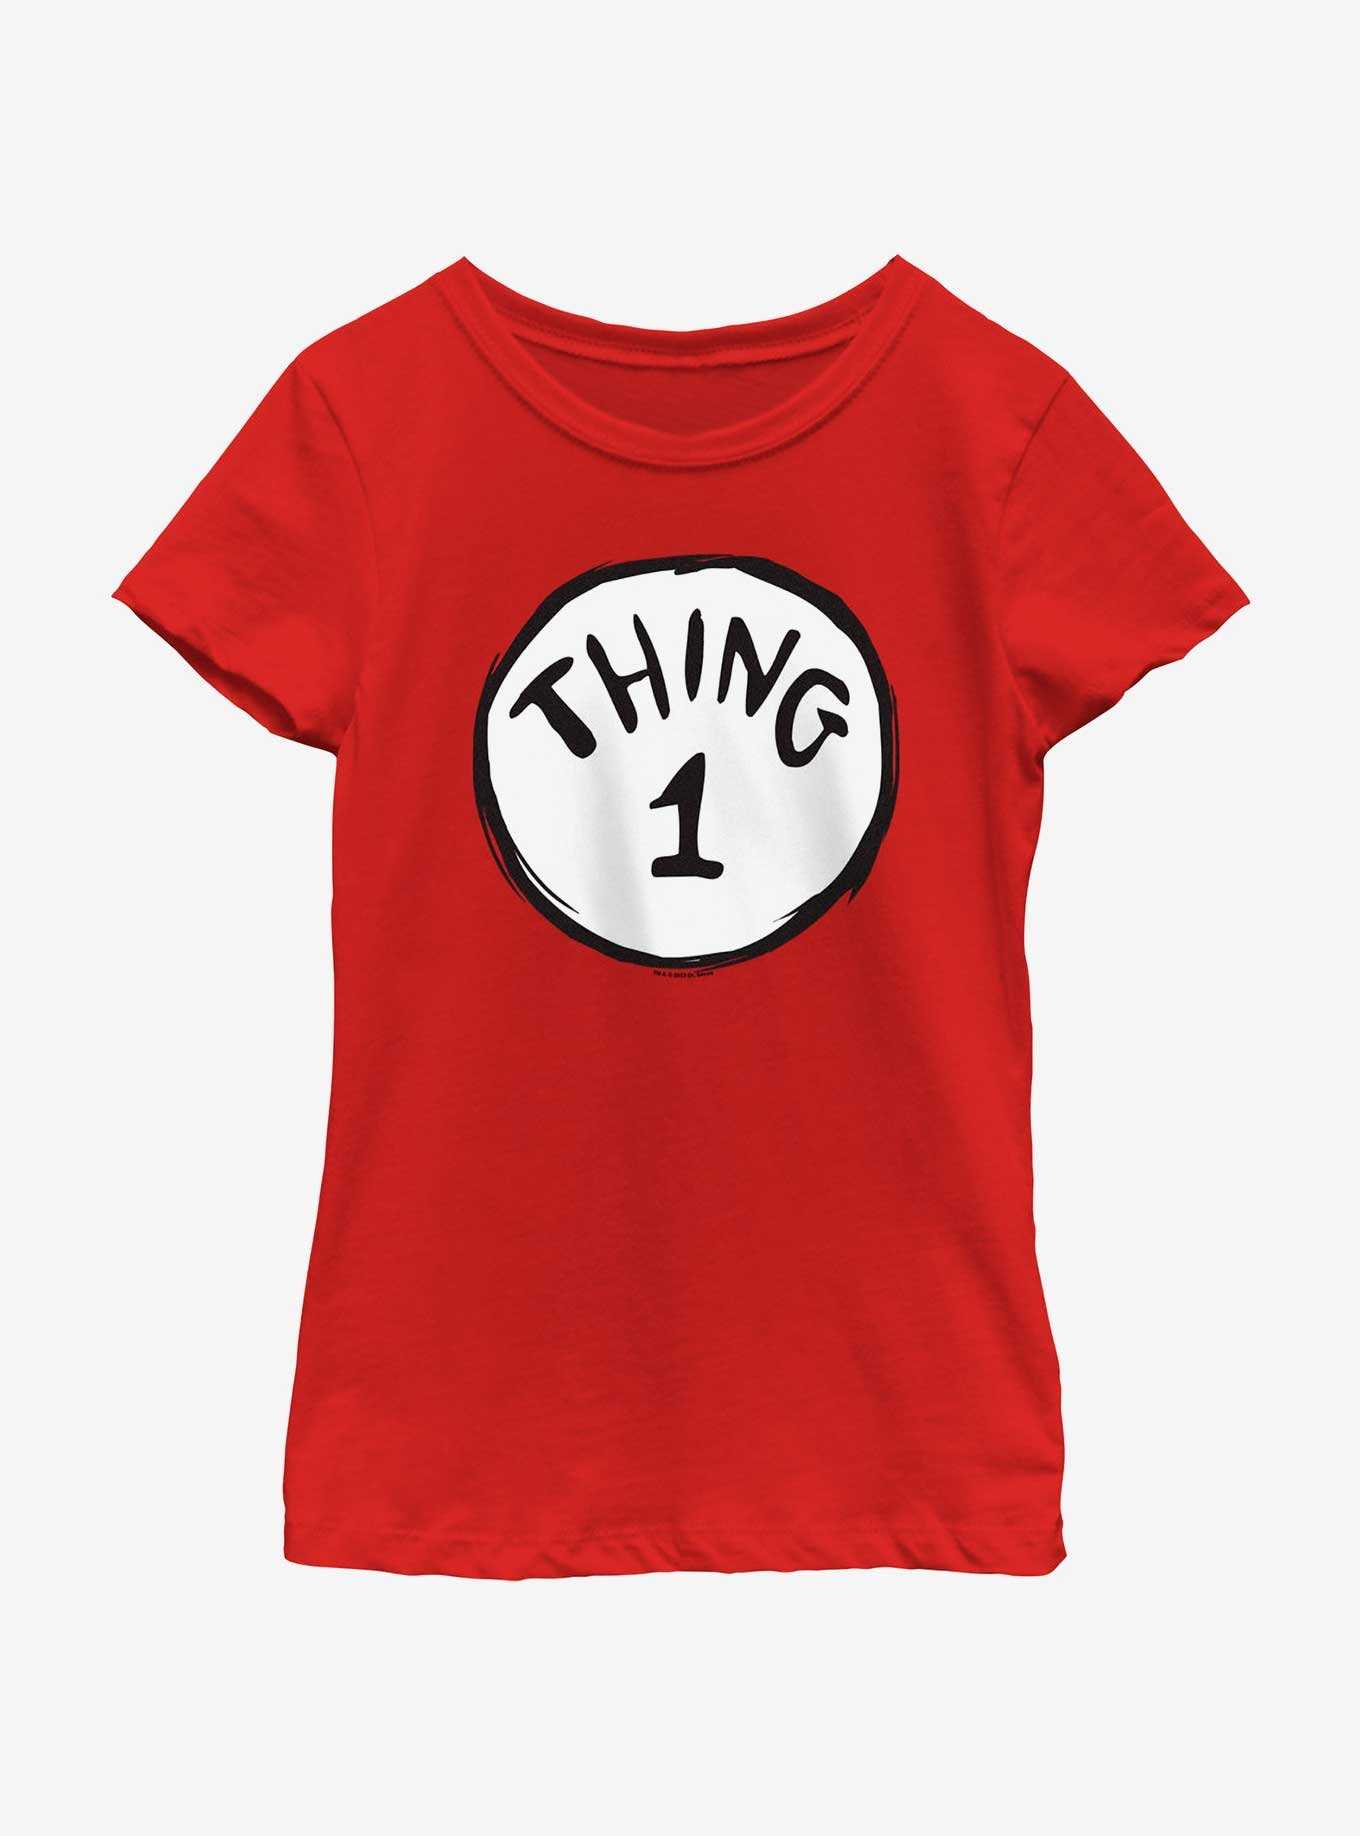 Dr. Seuss's Cat In The Hat Thing 1 Youth Girls T-Shirt, , hi-res